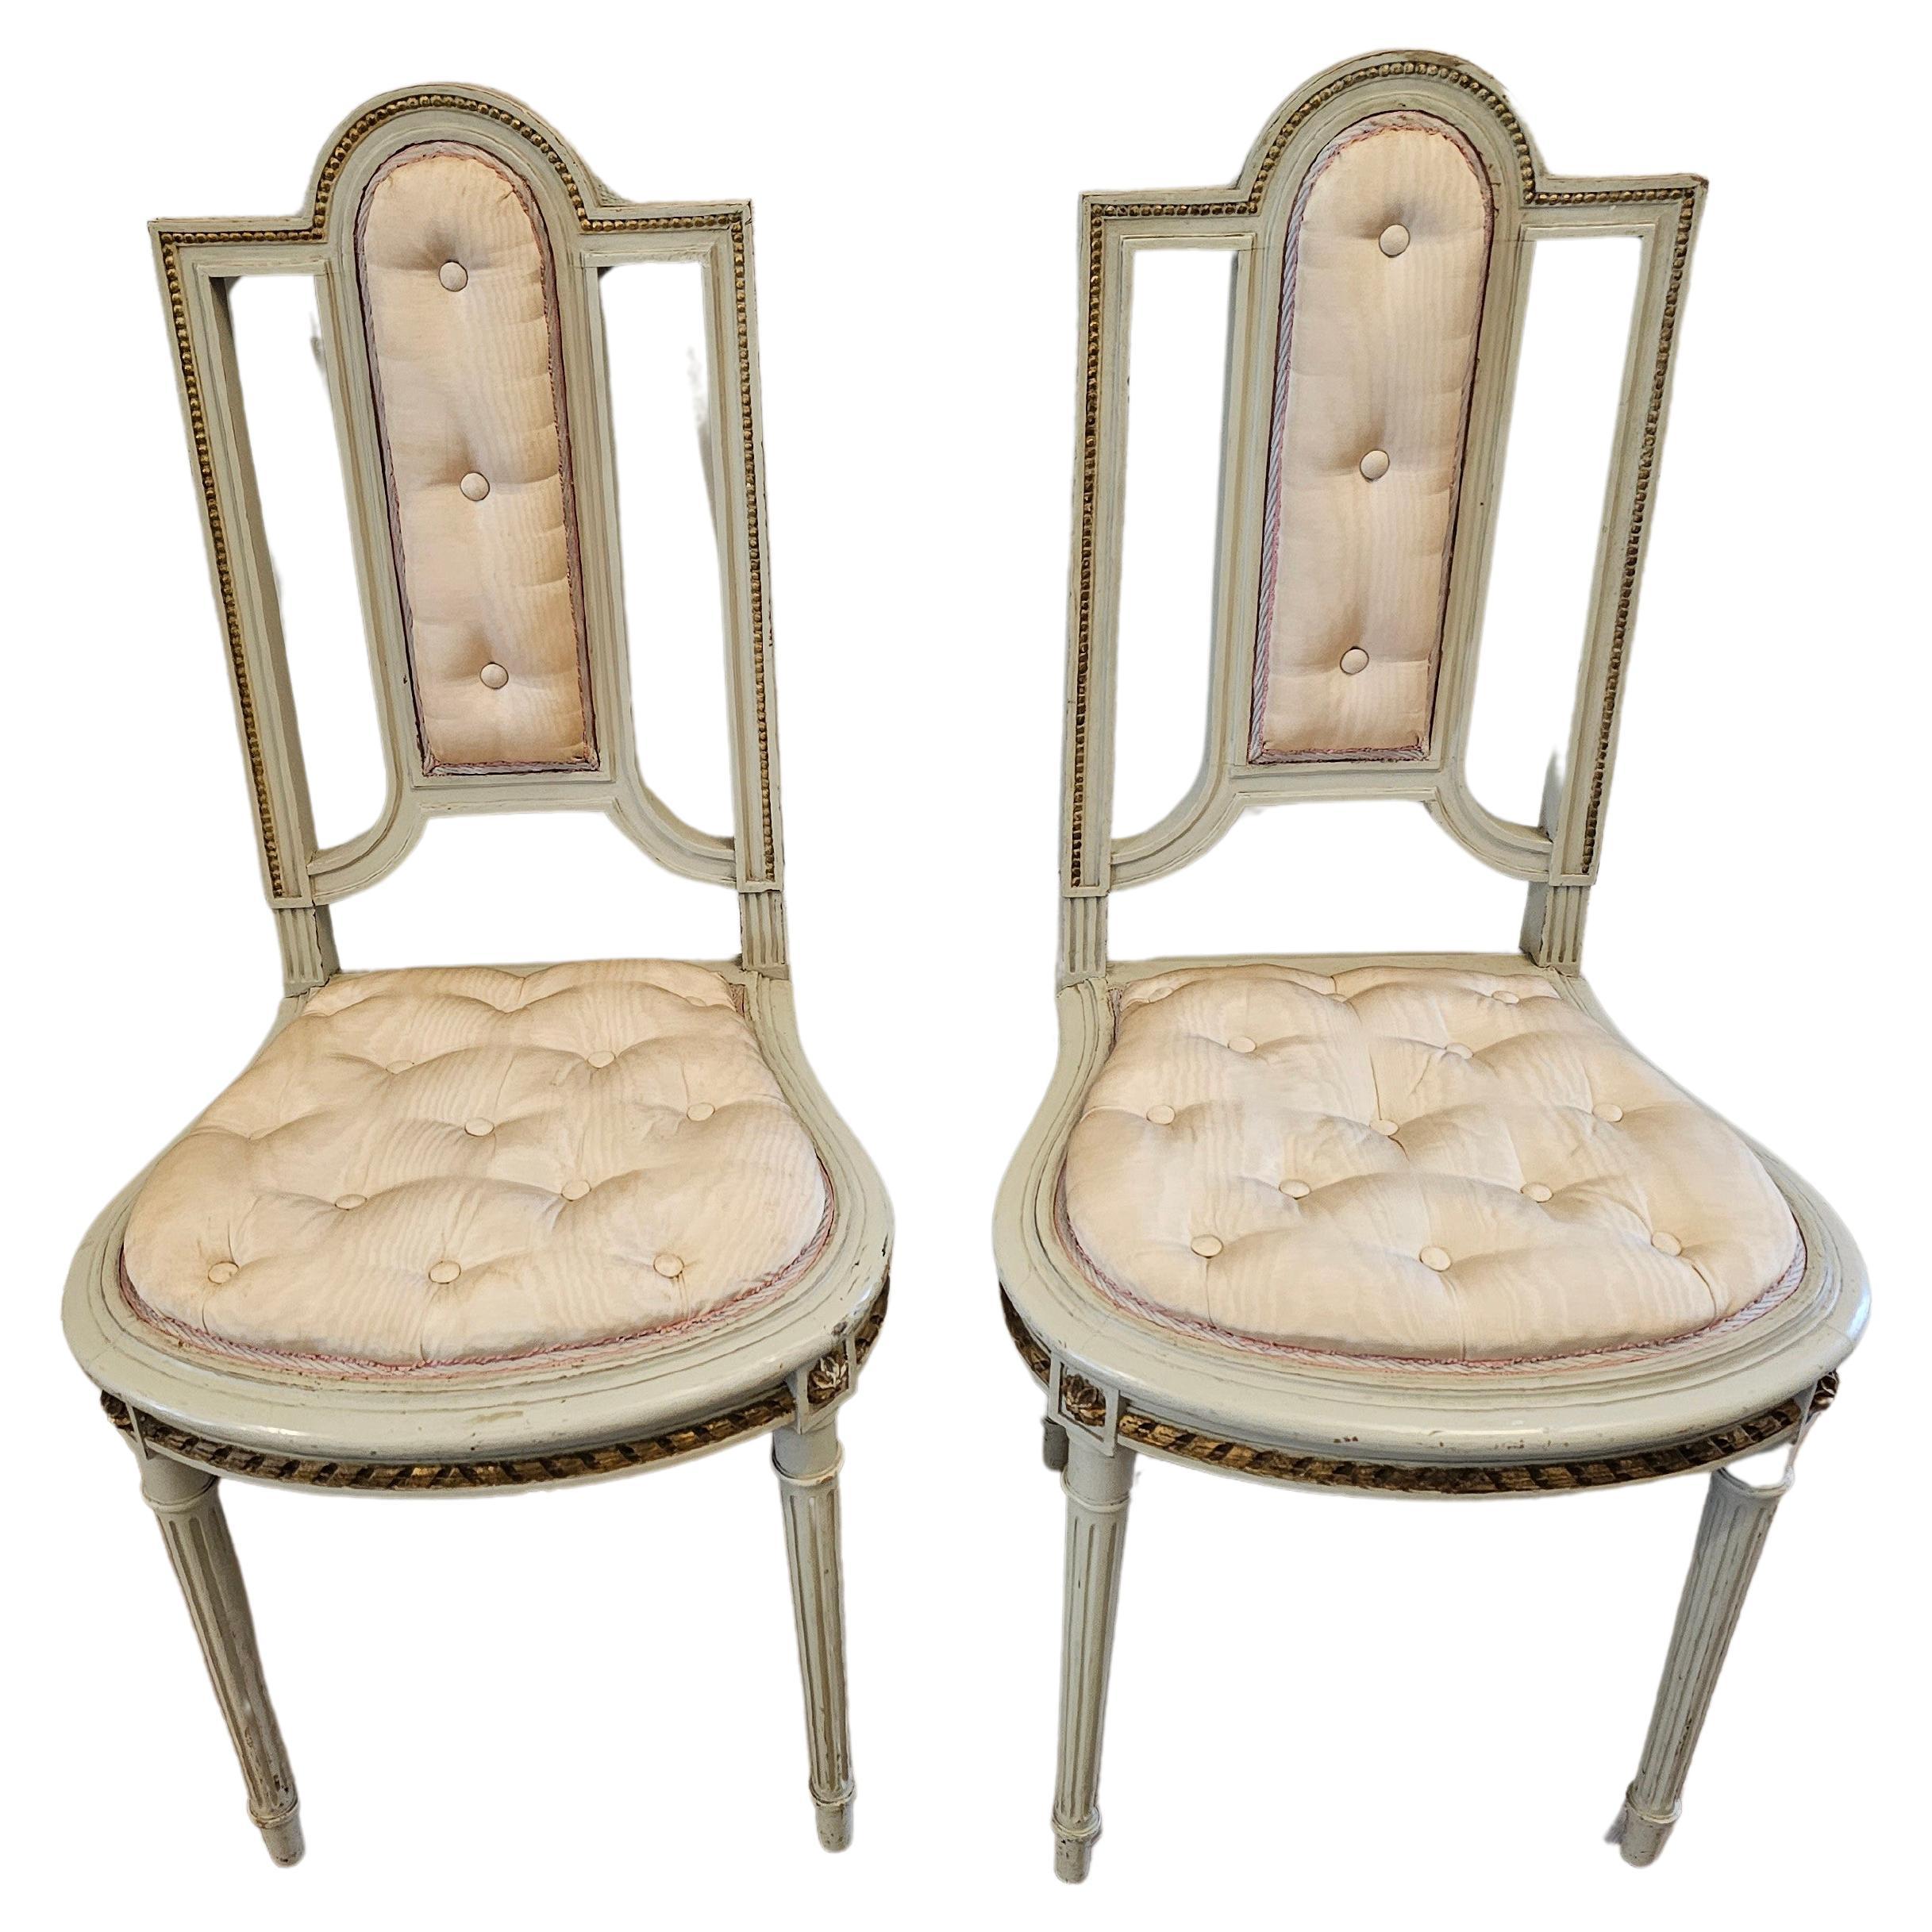 Pair of French Louis XVI Painted Parcel Gilt Petite Antique Chairs